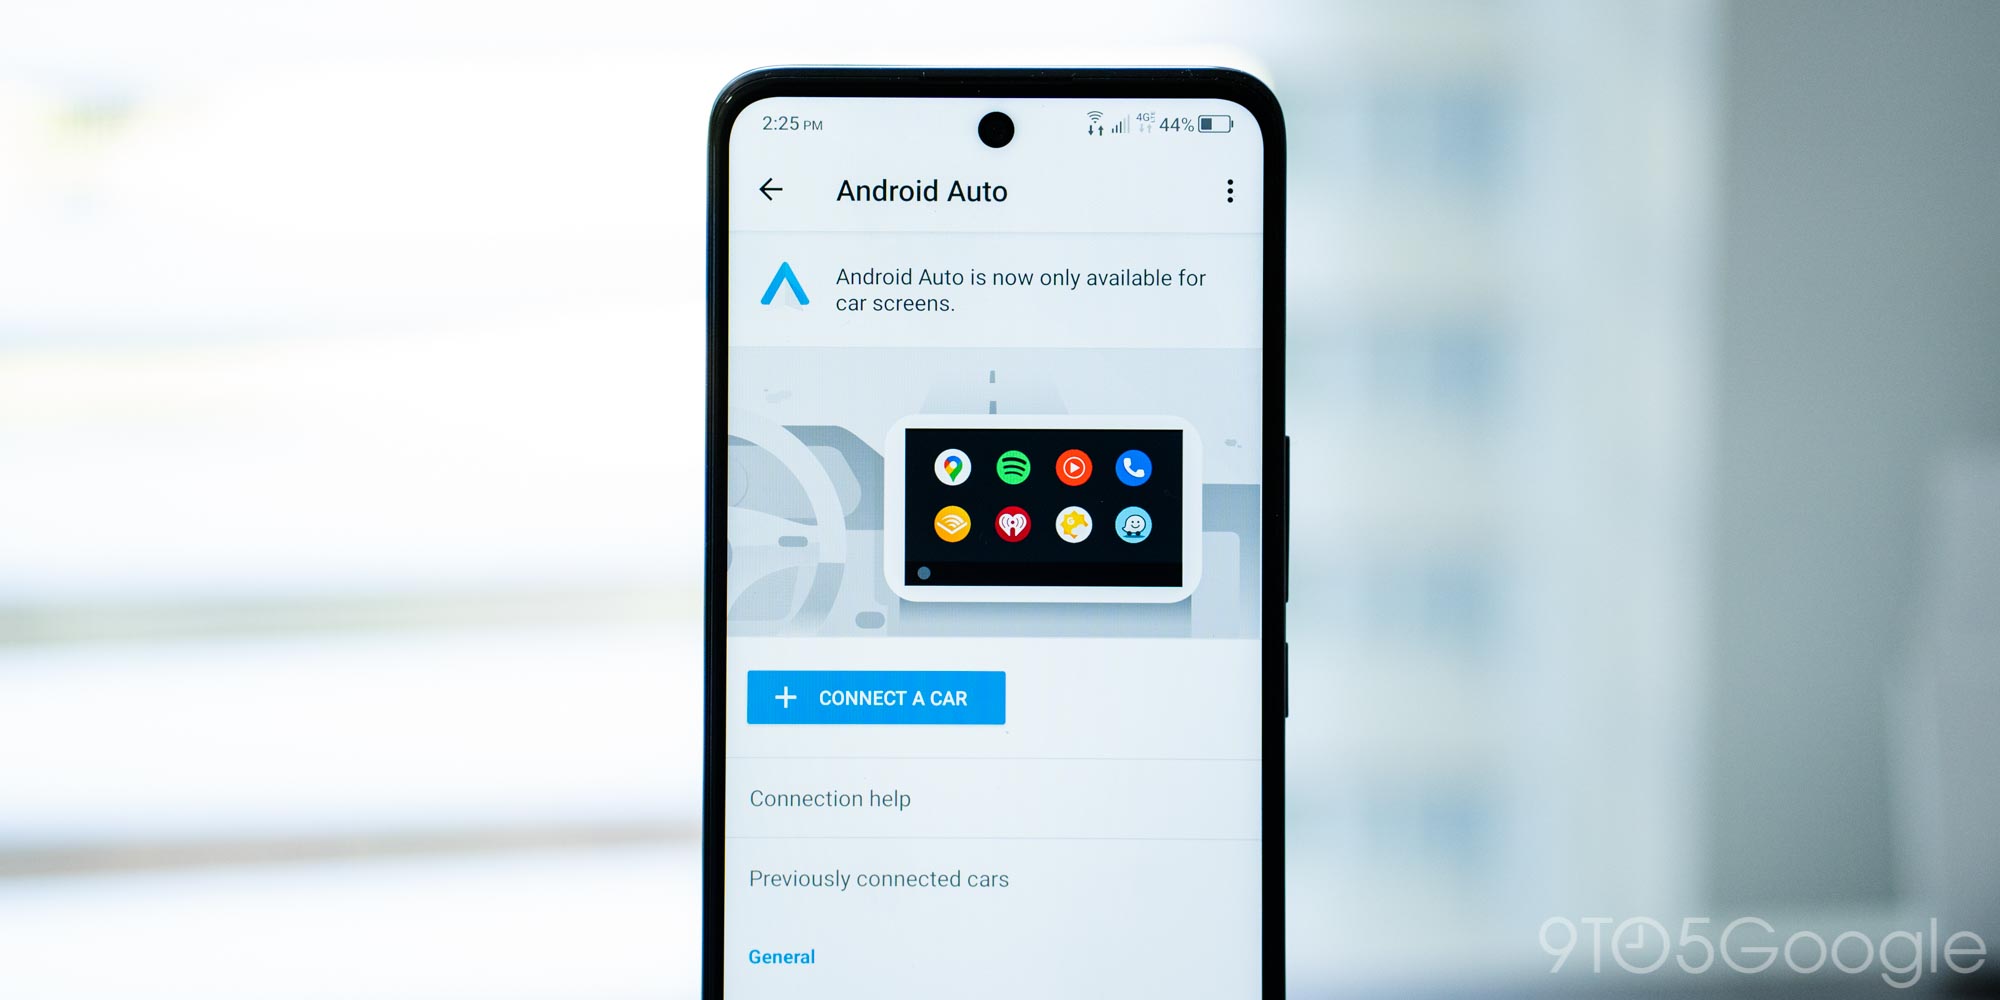 Tutorial: How to setup wireless Android Auto on non-Google phones